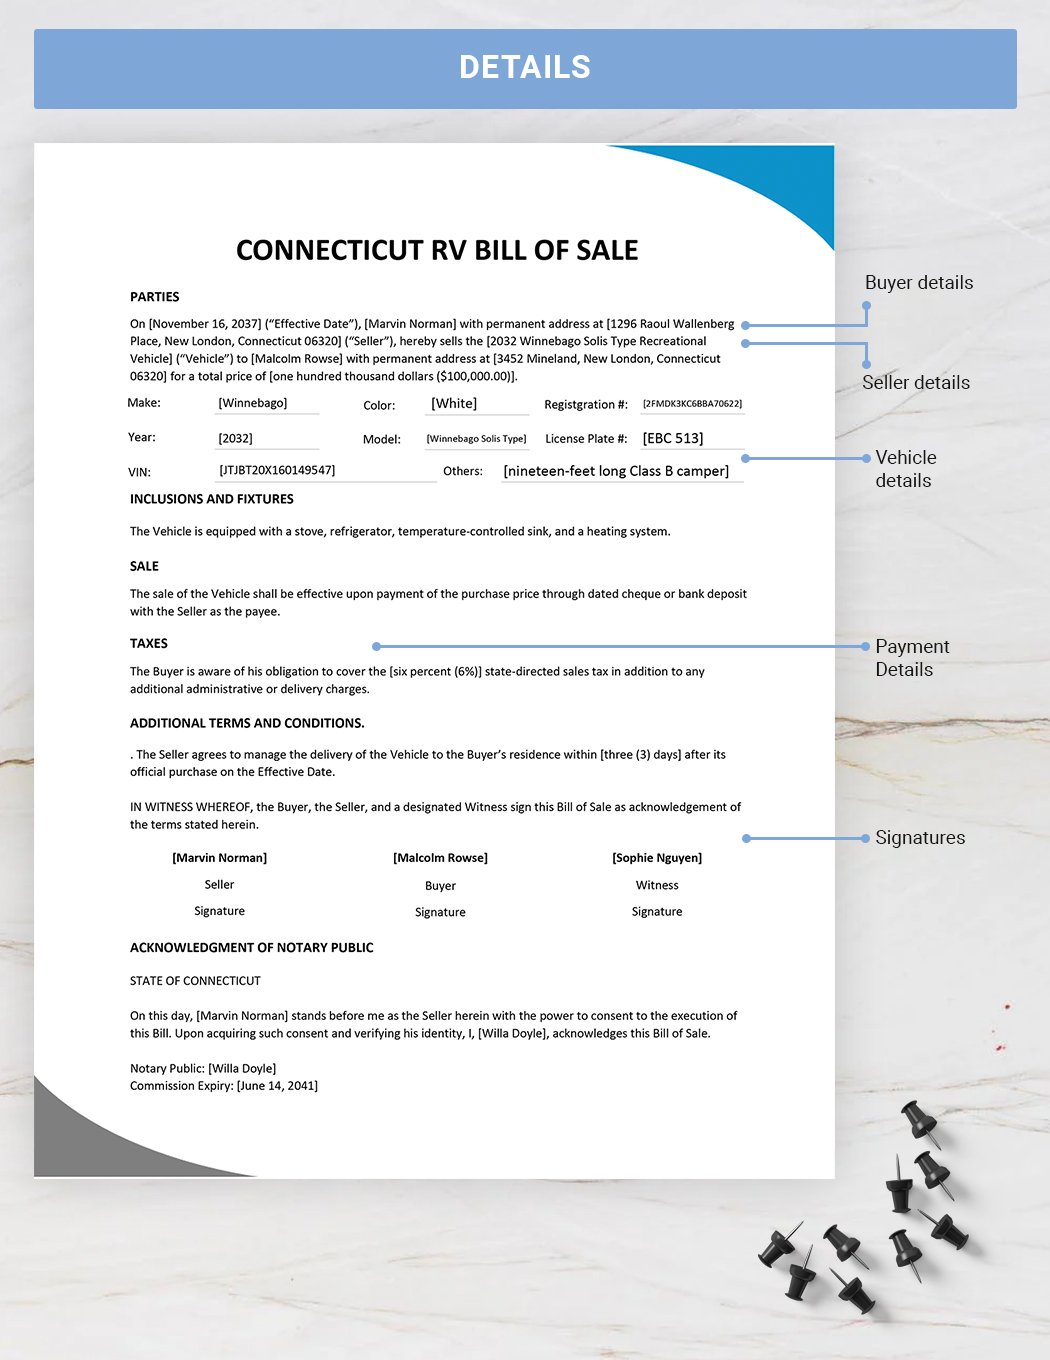 Connecticut RV Bill of Sale Form Template